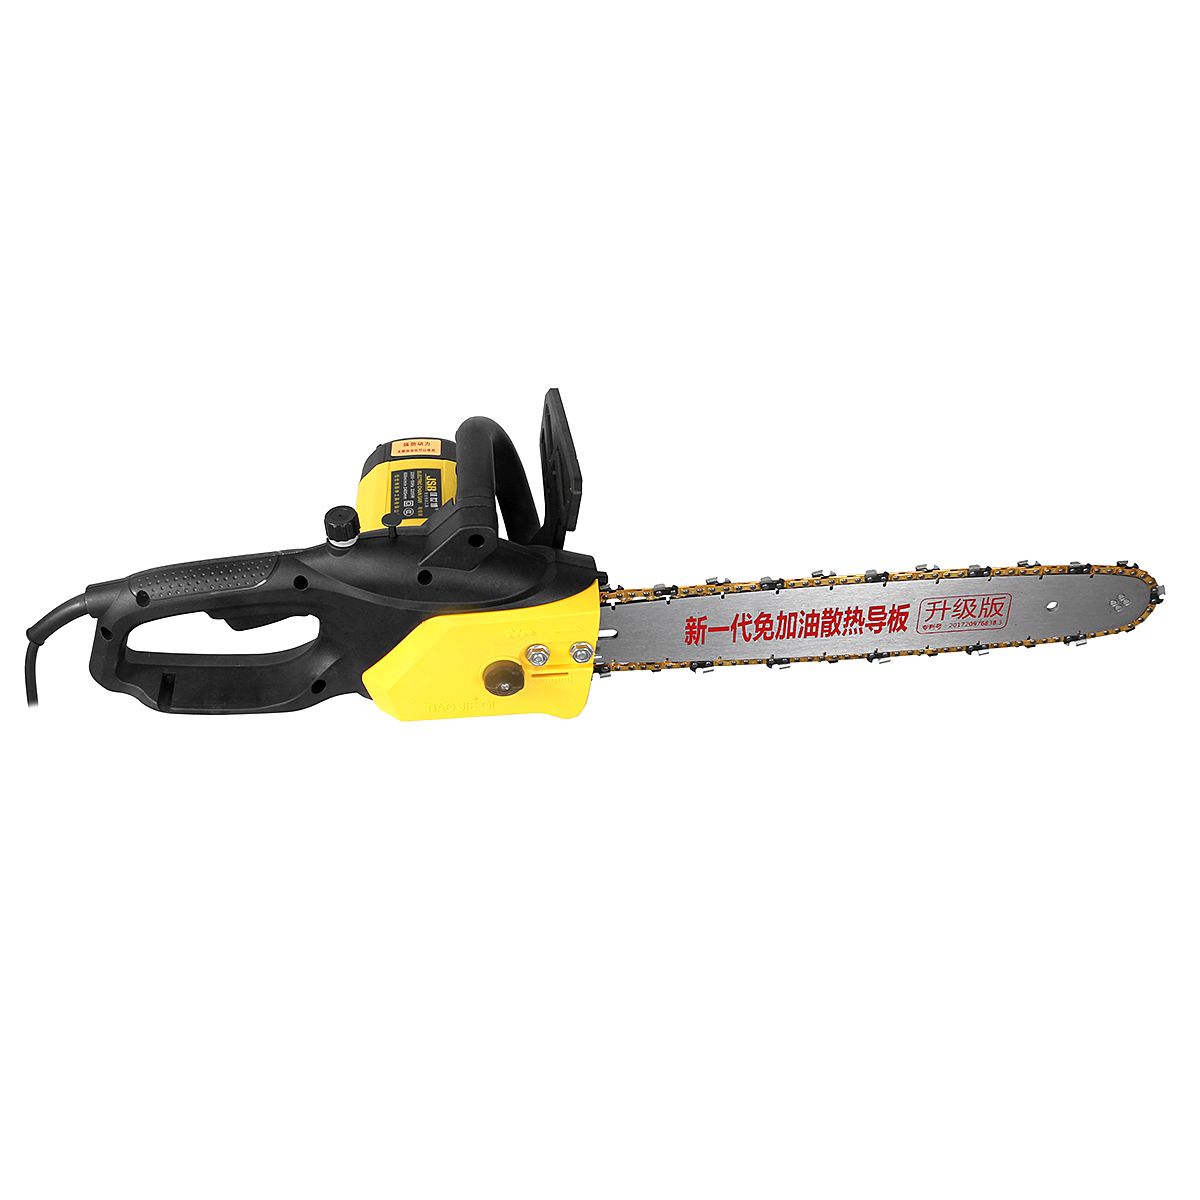 220V-2200W-Powerful-Multifunctional-Electric-Chainsaw-For-Wood-Working-Chain-Saw-Cutting-Power-Tools-1309399